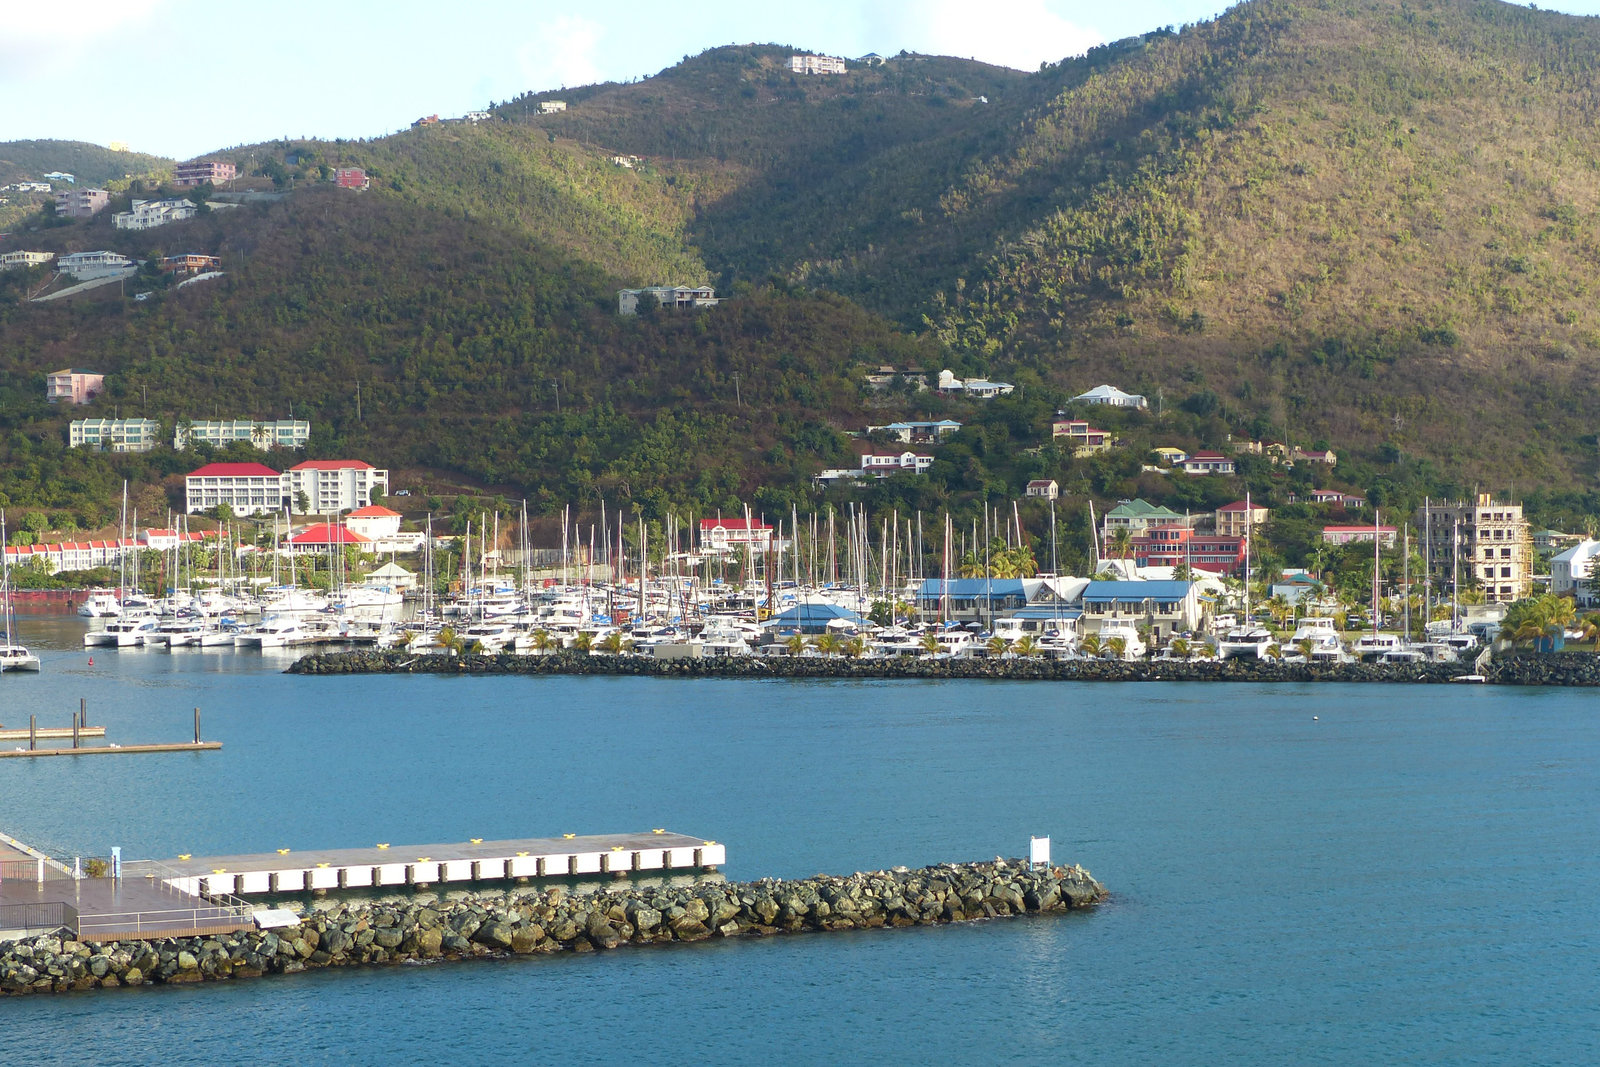 Road Town, Tortola (2) - 11 March 2019